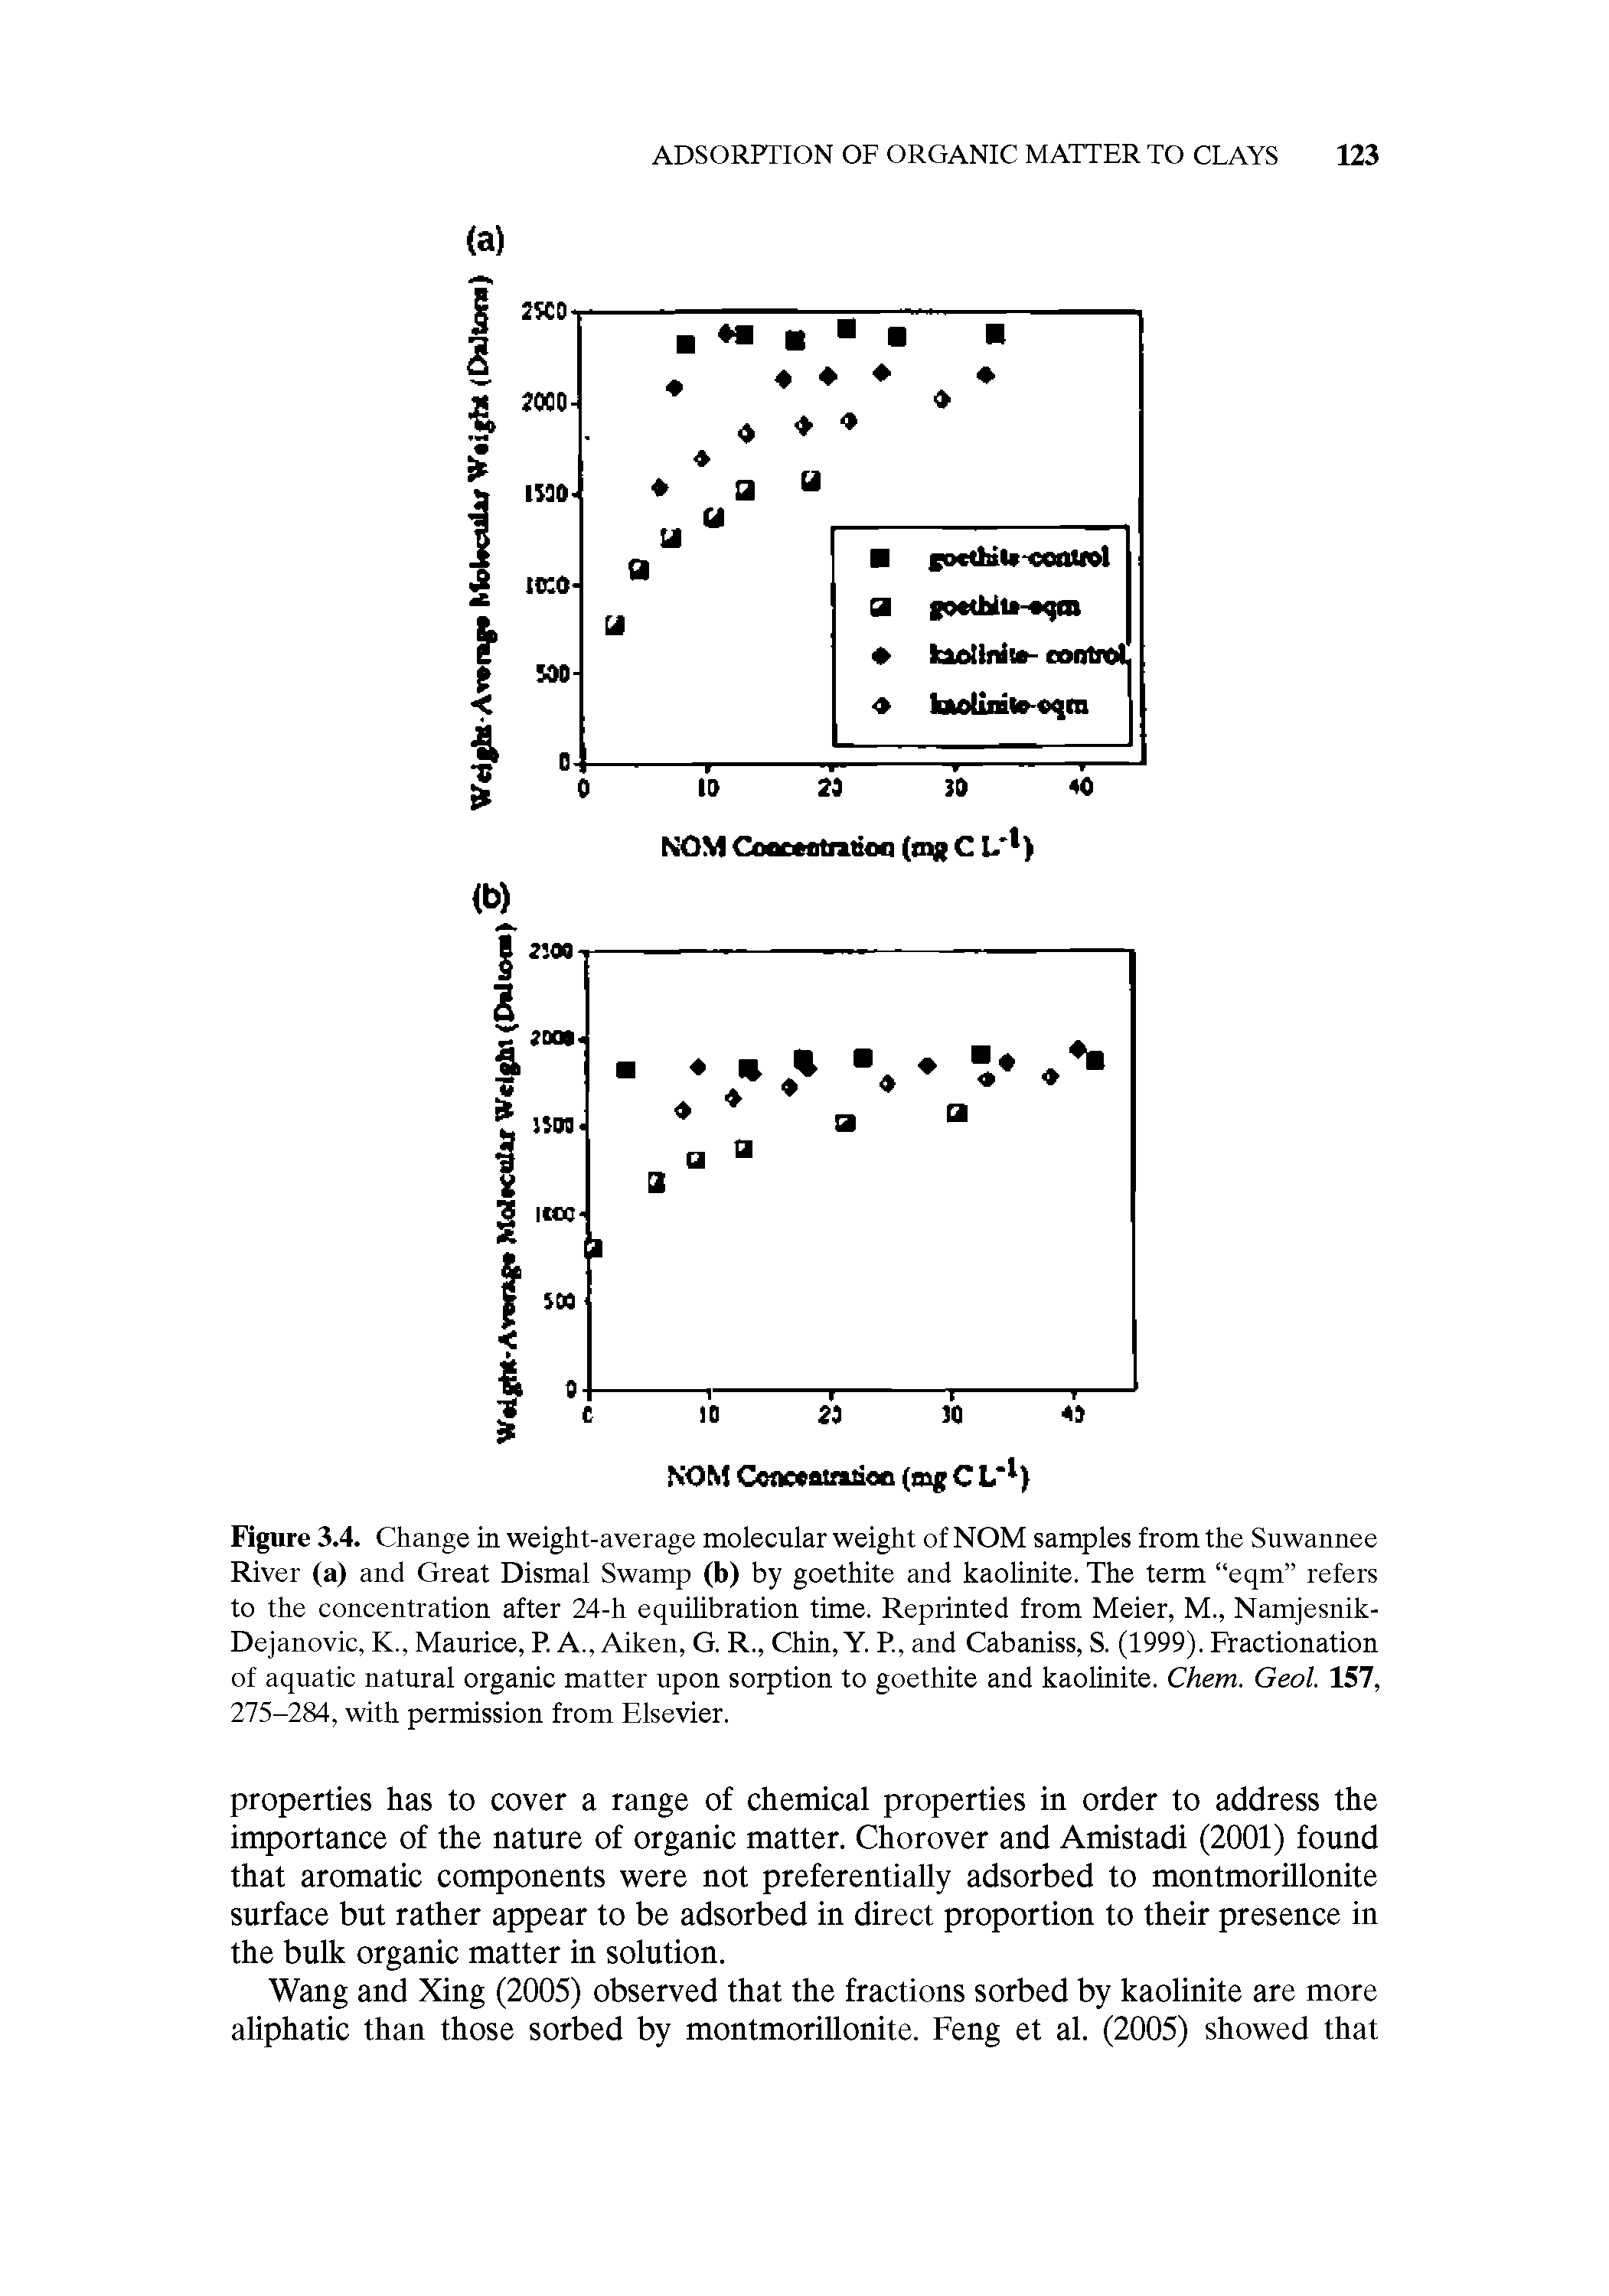 Figure 3.4. Change in weight-average molecular weight of NOM samples from the Suwannee River (a) and Great Dismal Swamp (b) by goethite and kaolinite. The term eqm refers to the concentration after 24-h equilibration time. Reprinted from Meier, M., Namjesnik-Dejanovic, K., Maurice, P. A., Aiken, G. R., Chin, Y. P., and Cabaniss, S. (1999). Fractionation of aquatic natural organic matter upon sorption to goethite and kaolinite. Chem. Geol. 157, 275-284, with permission from Elsevier.